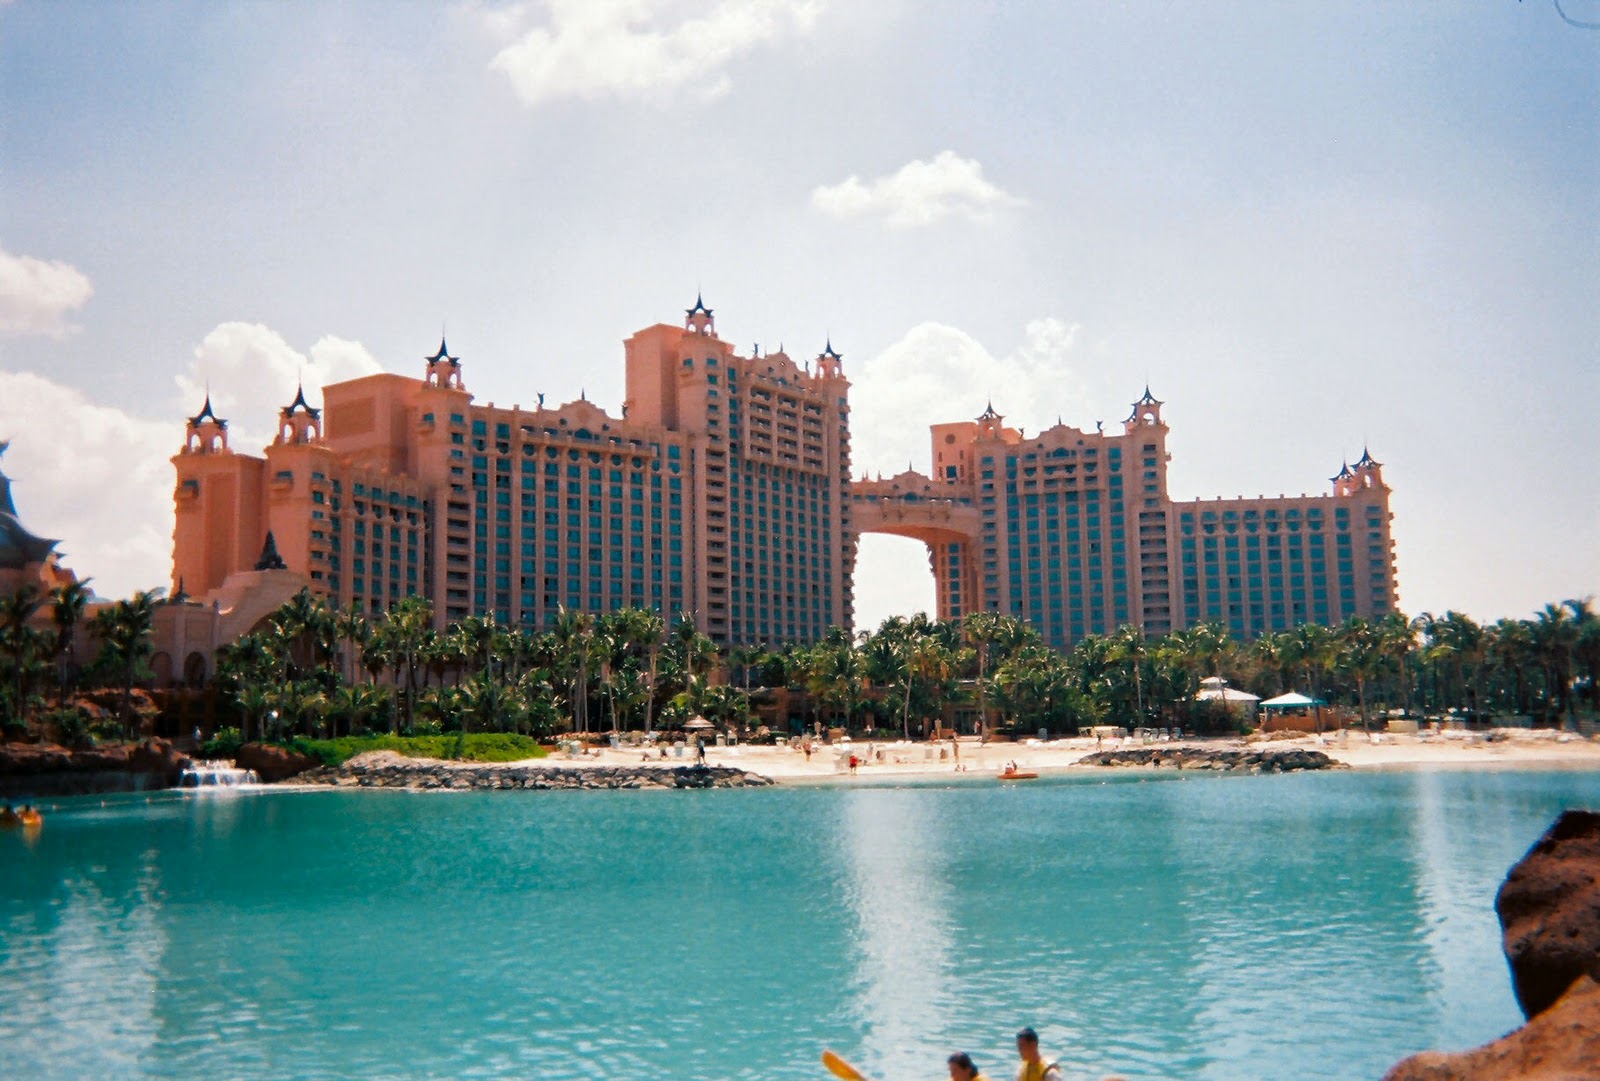 Atlantis Water park have many activities for tourists attraction